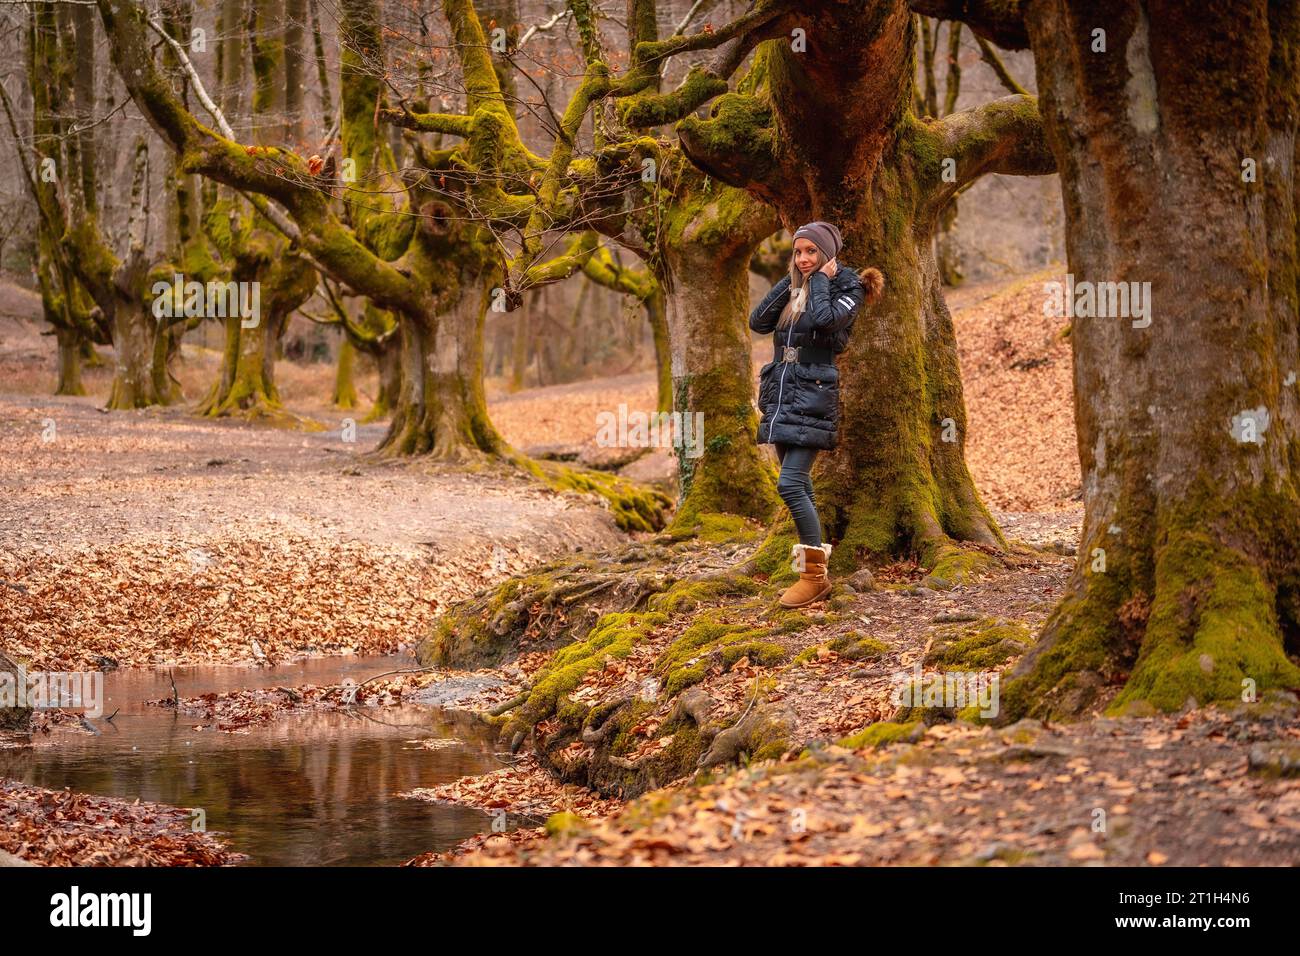 A young woman next to the Otzarreta Forest river in the Gorbea natural park, Bizkaia. Basque Country. Lifestyle session Stock Photo